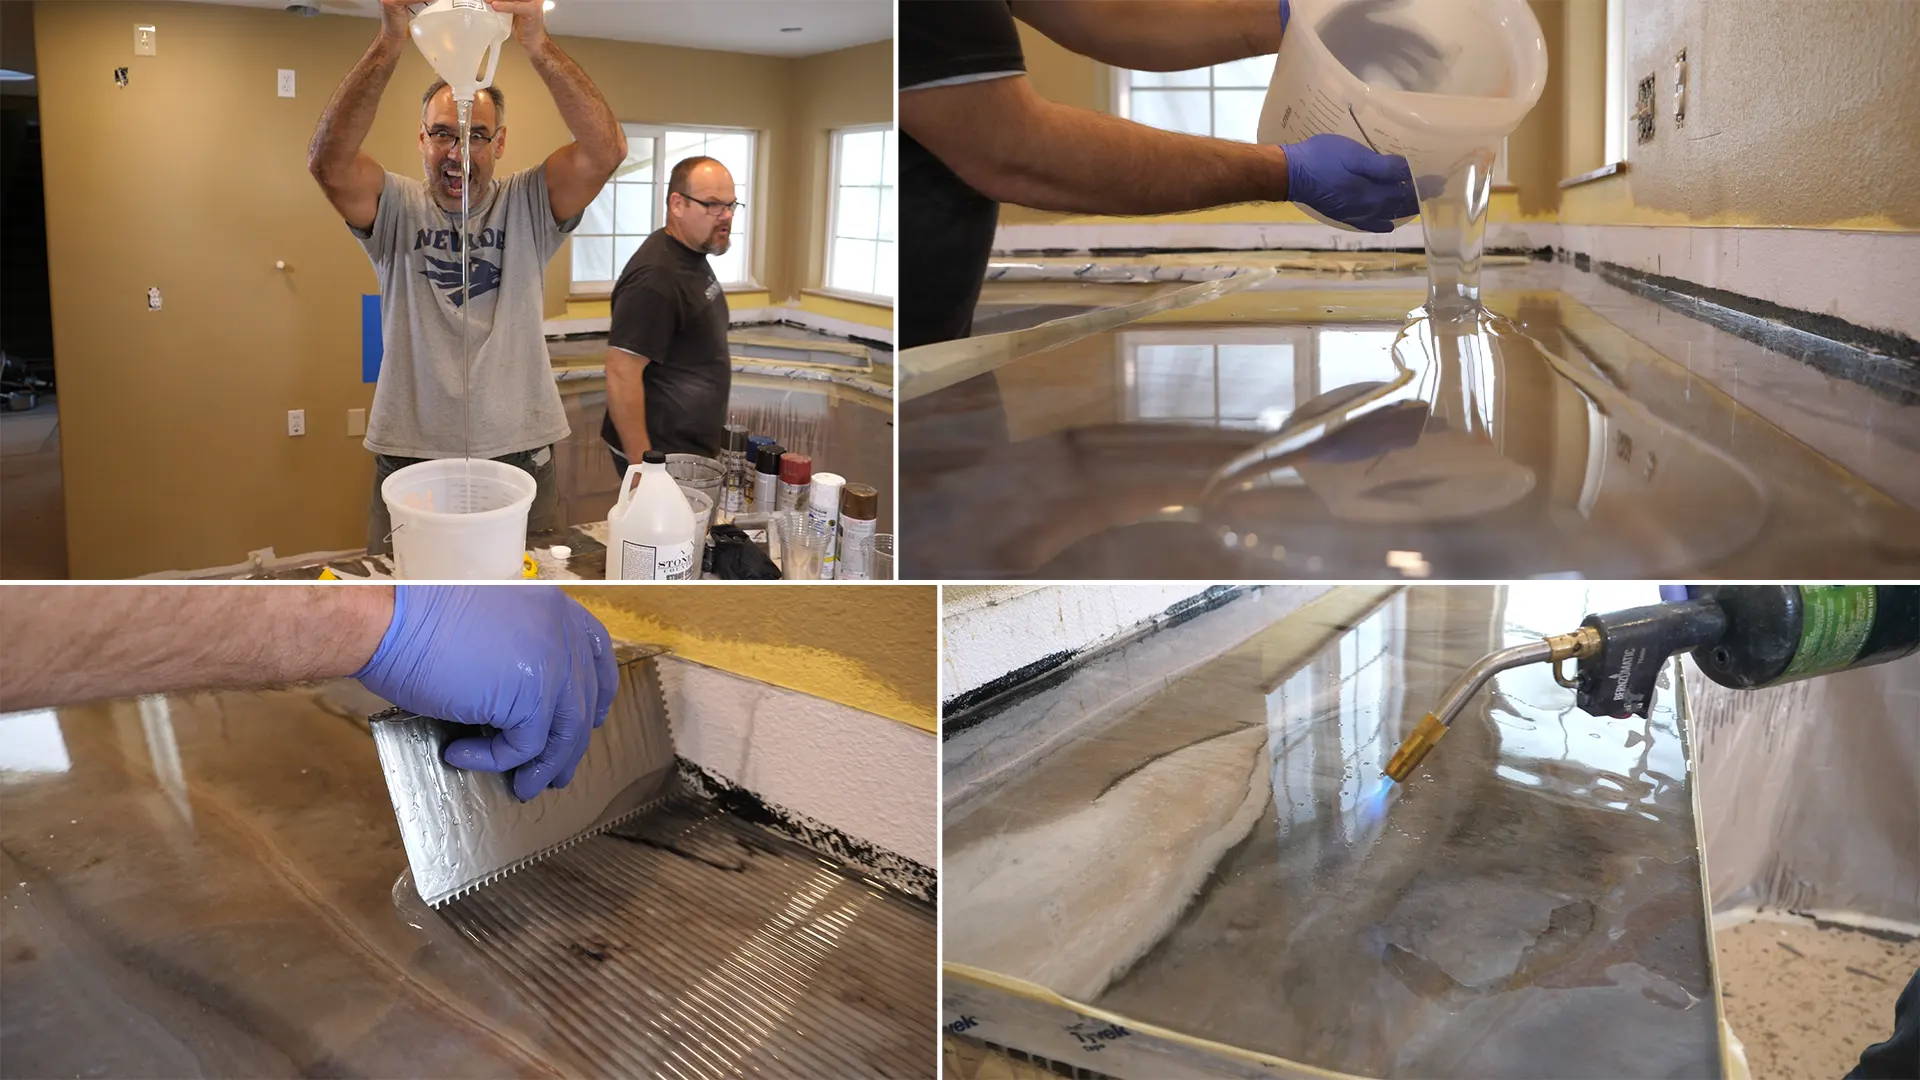 Mixing 1:1 Stone Coat Countertop Epoxy, 3 ounces per square foot, and applying evenly with a 1/8'' notch trowel. 